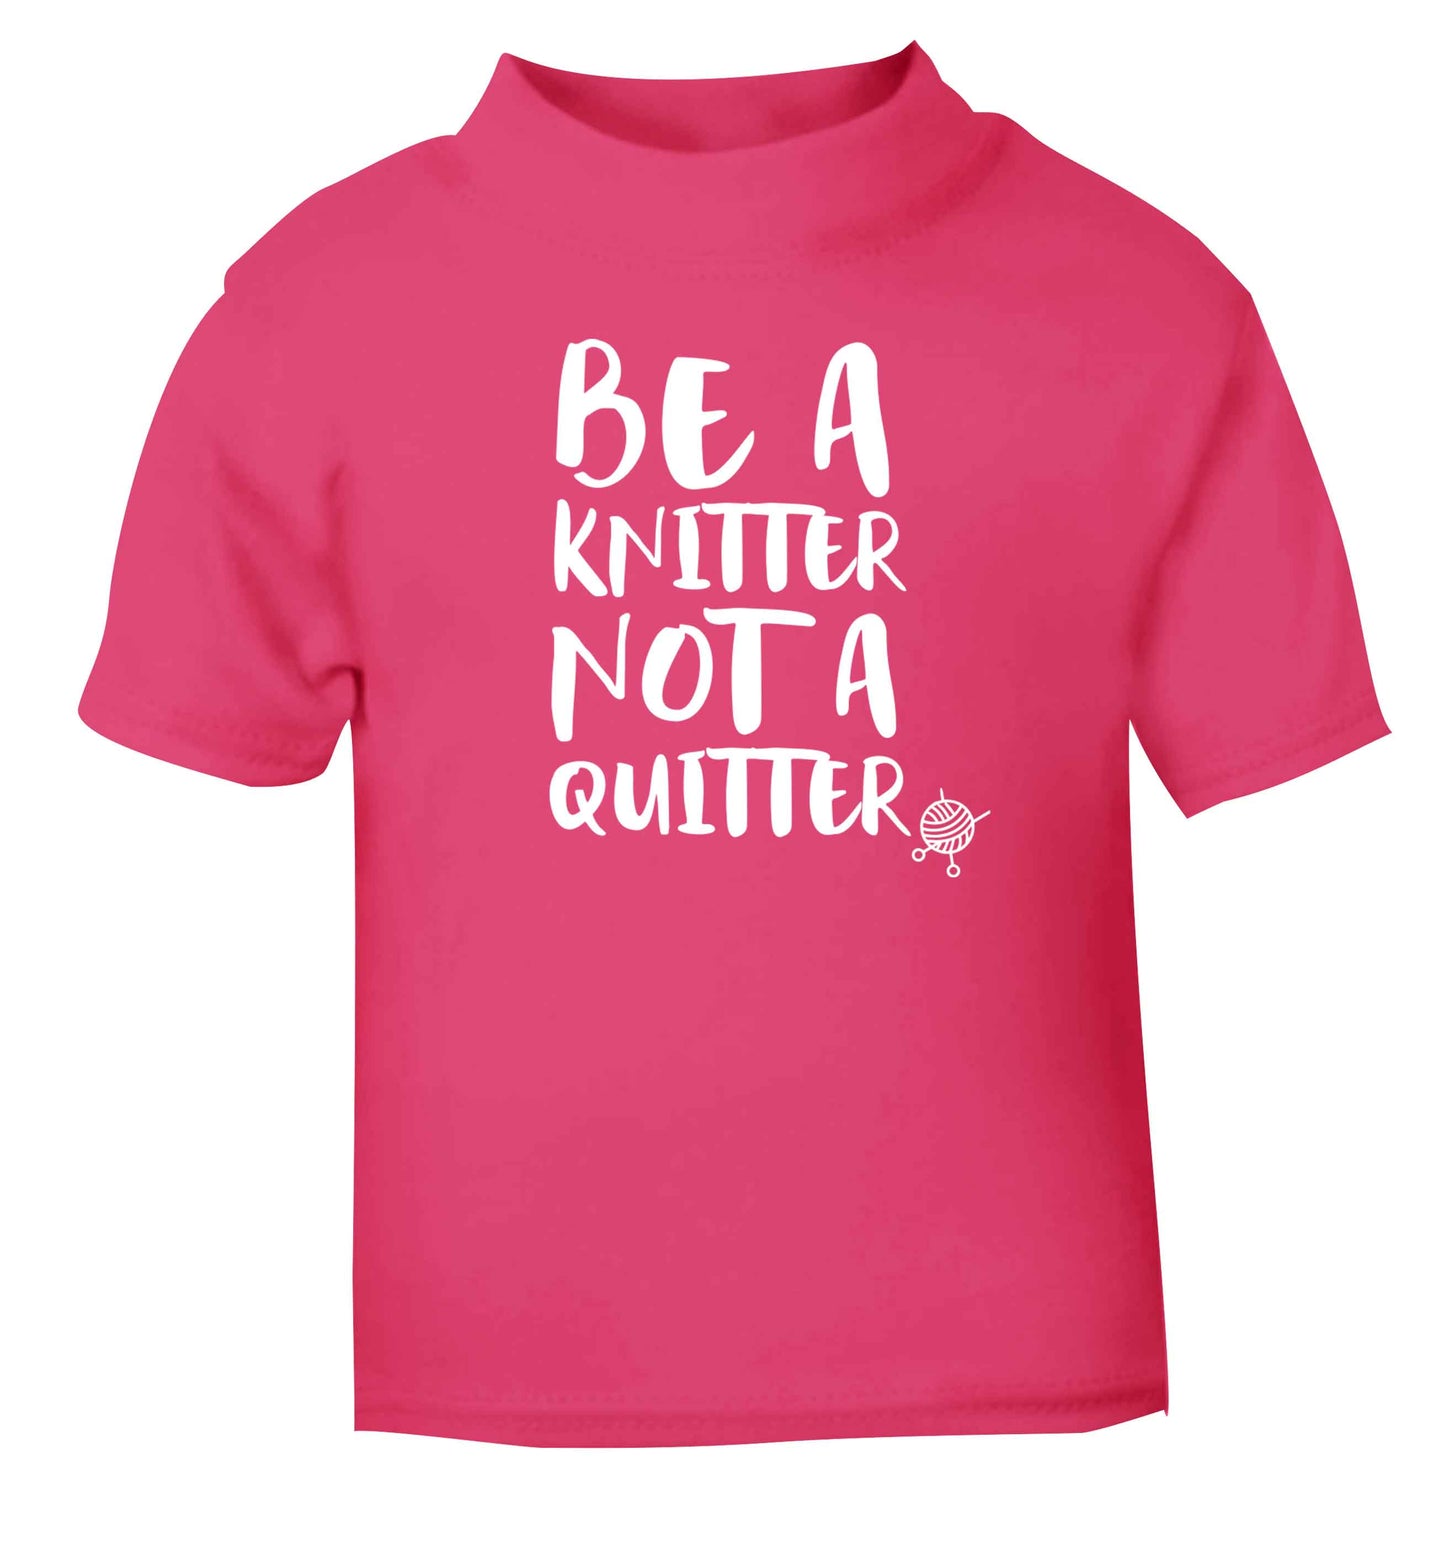 Be a knitter not a quitter pink Baby Toddler Tshirt 2 Years